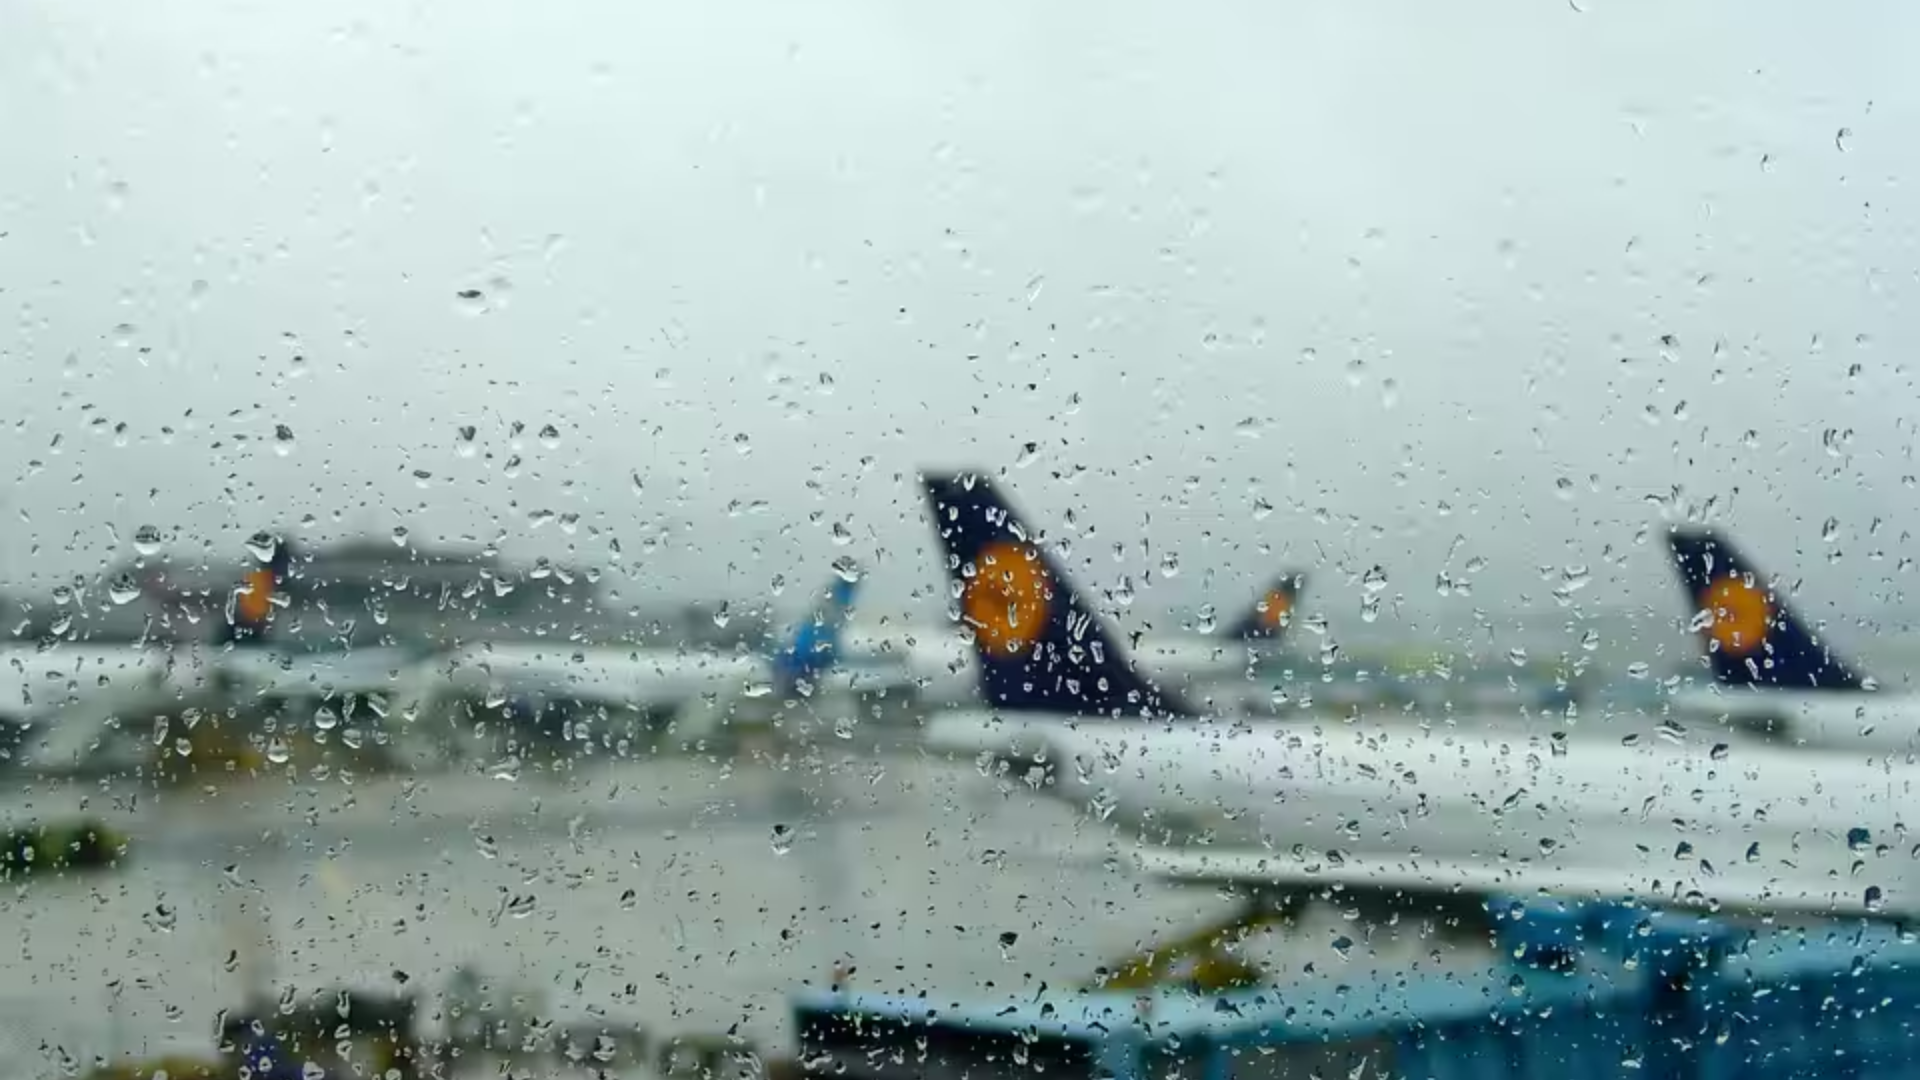 Rain And Gusty Winds Force Flight Diversions From Delhi To Jaipur